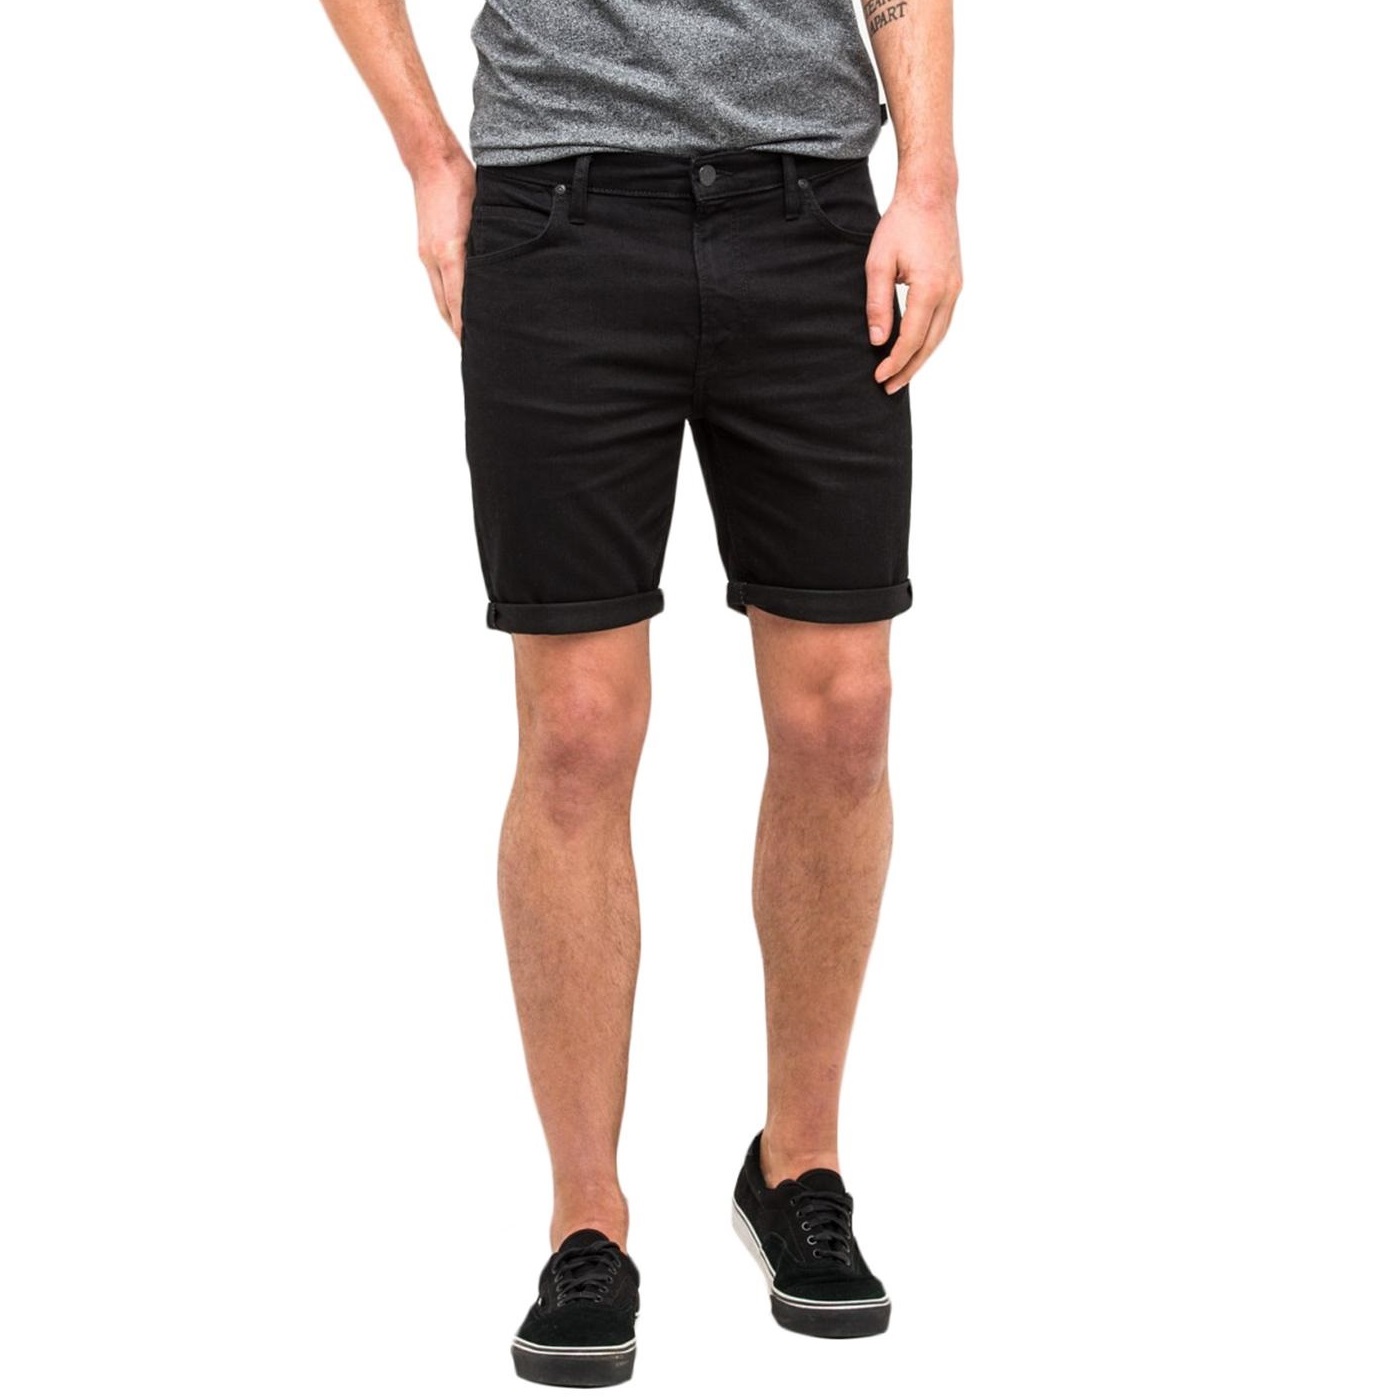 Denim Shorts Snake Patched 3754 | Mens shorts outfits, Mens casual dress  outfits, Mens pants fashion